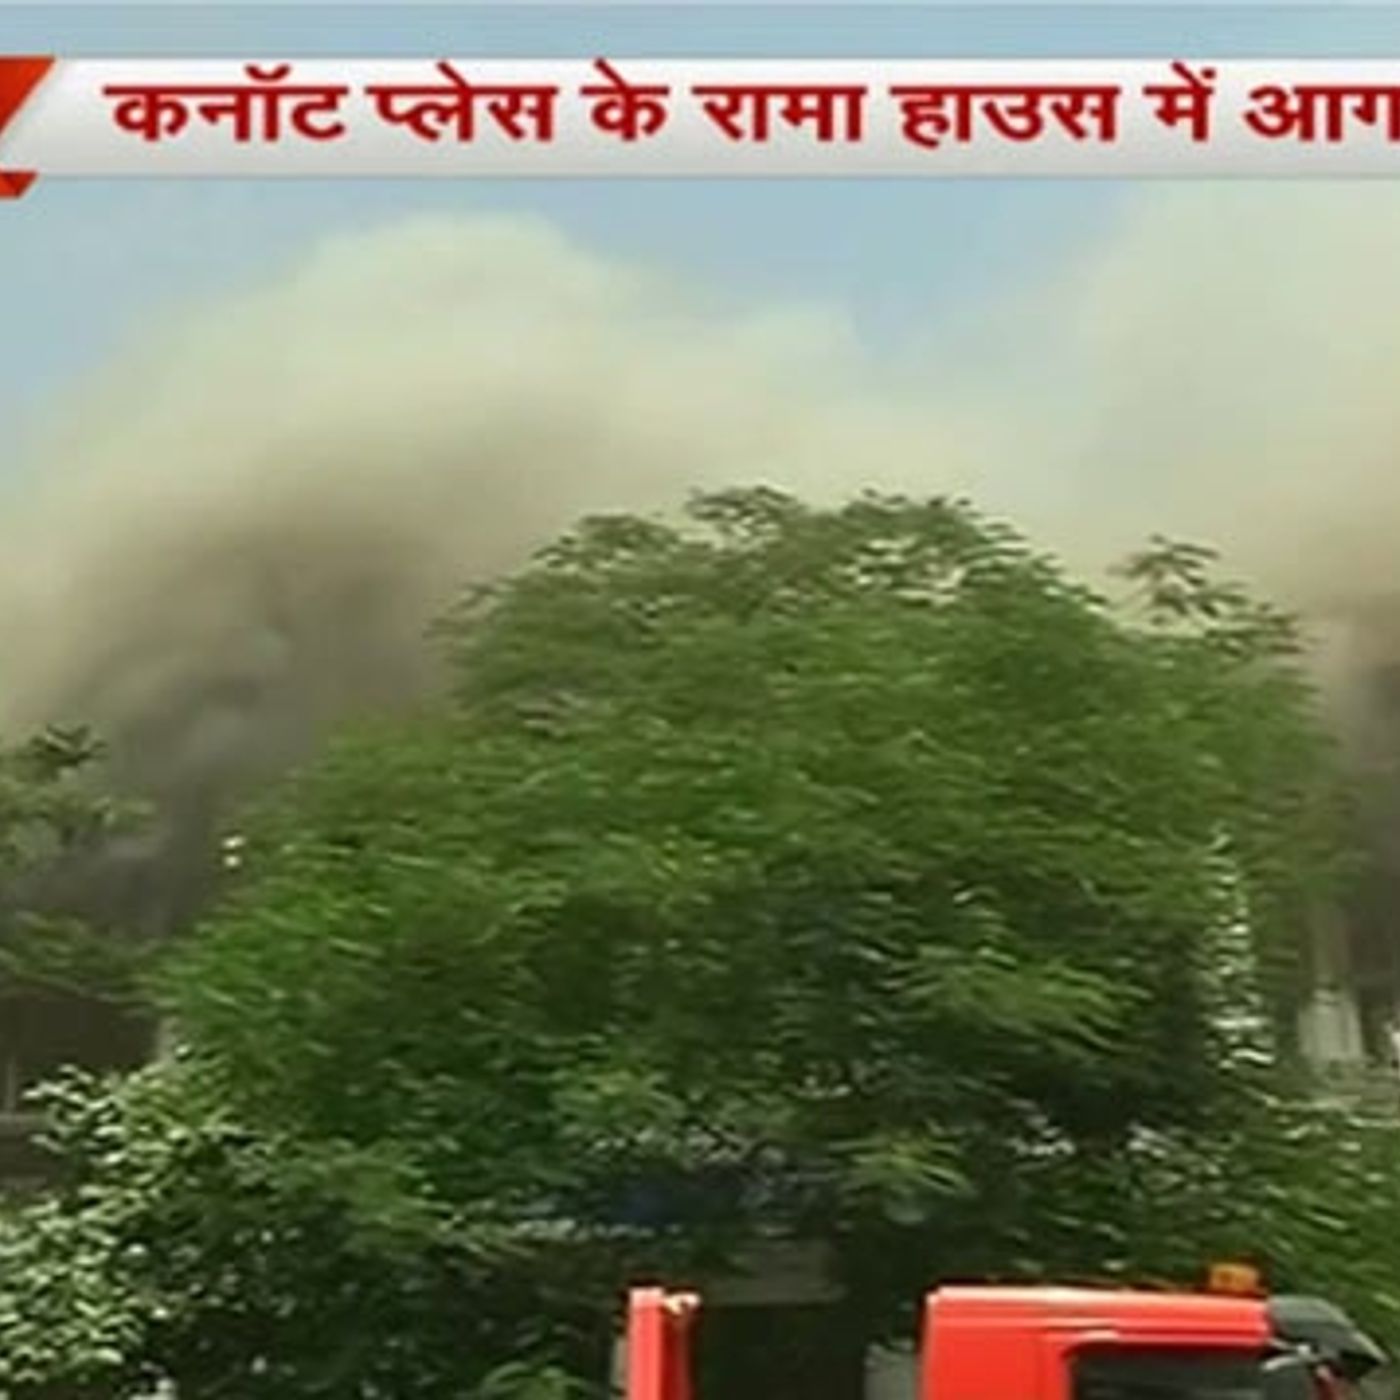 Delhi Fire breaks out at Rama House building in CP